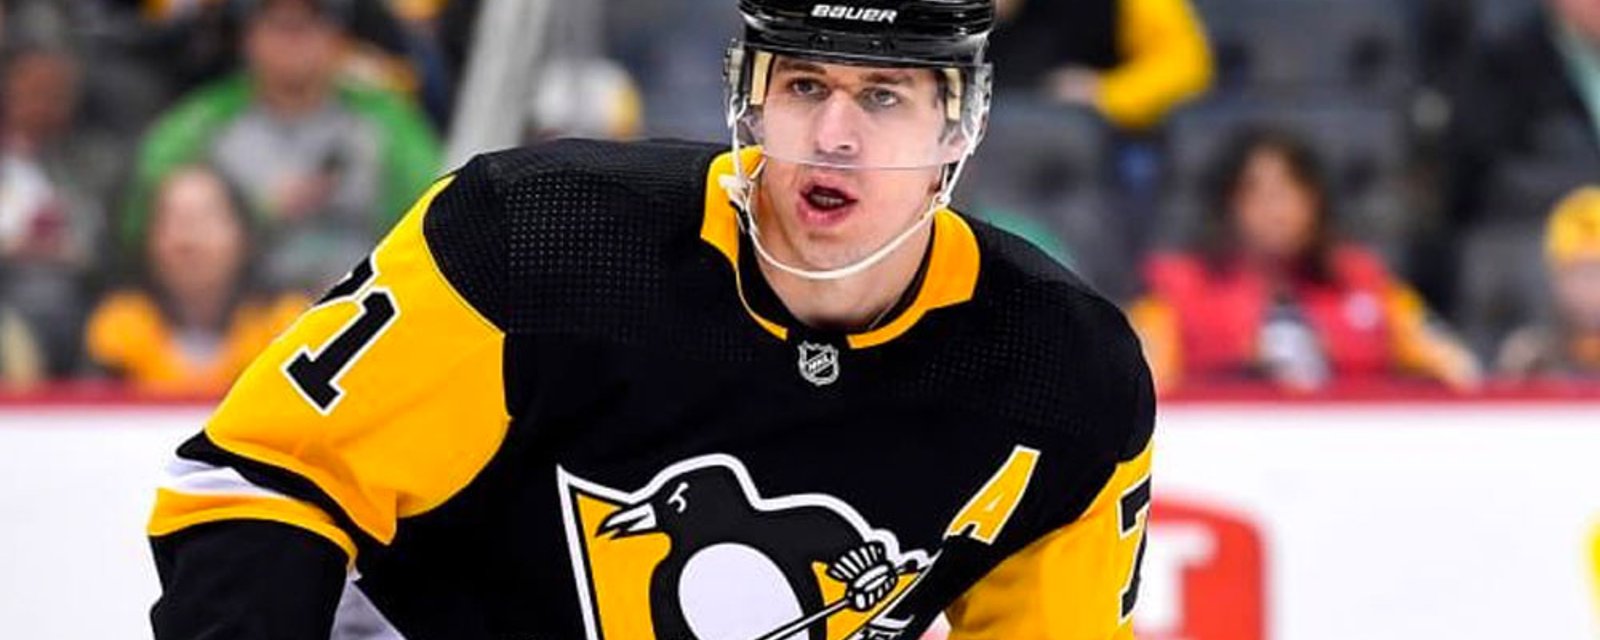 Malkin leaves Pens’ warmup early before game vs. Leafs